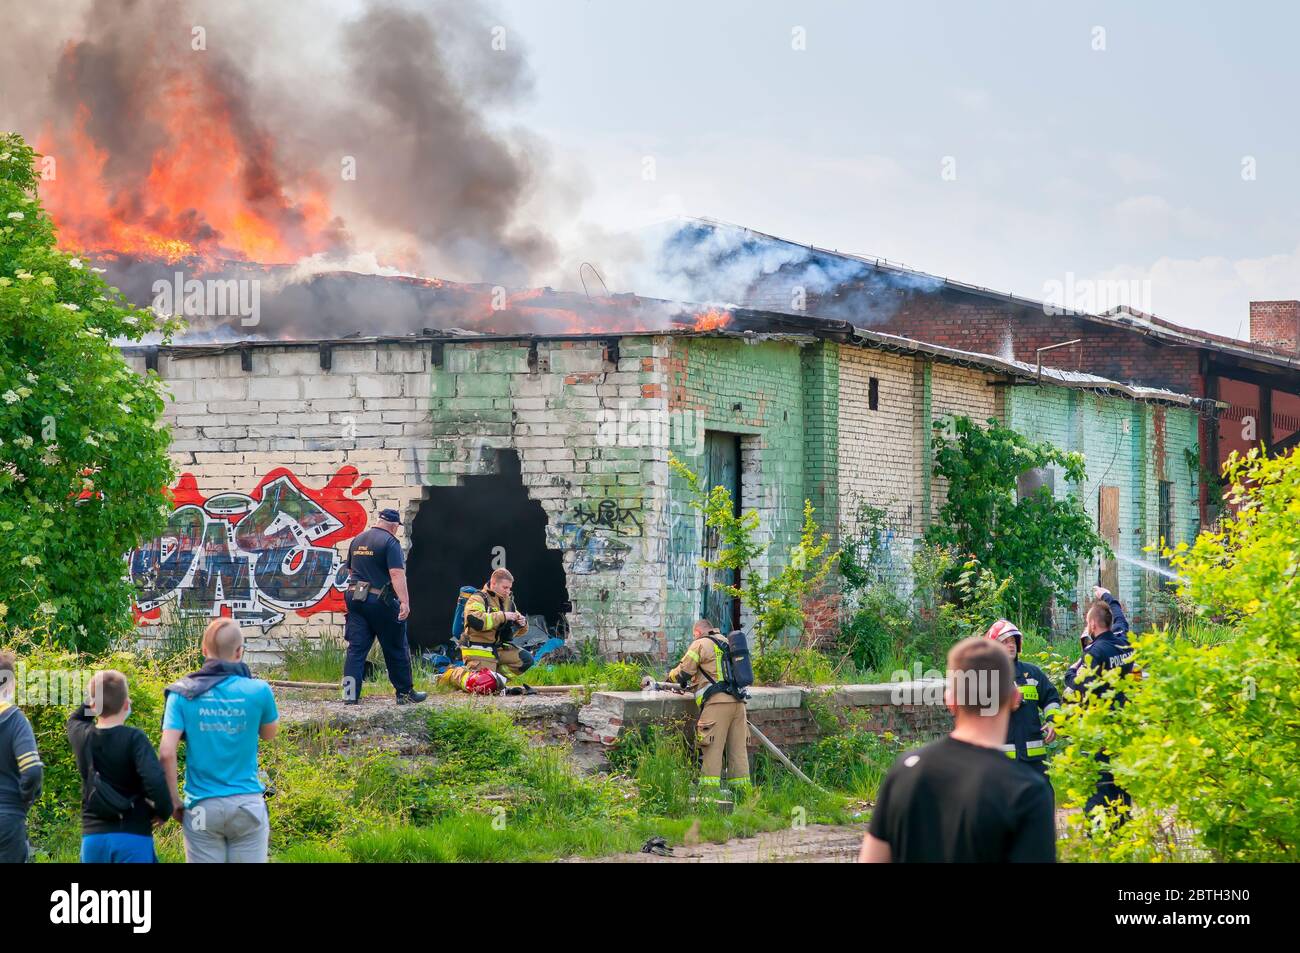 Wroclaw, Poland, May 2020. Firefighters, Fire brigade fighting fire in old abandoned building, Stock Photo